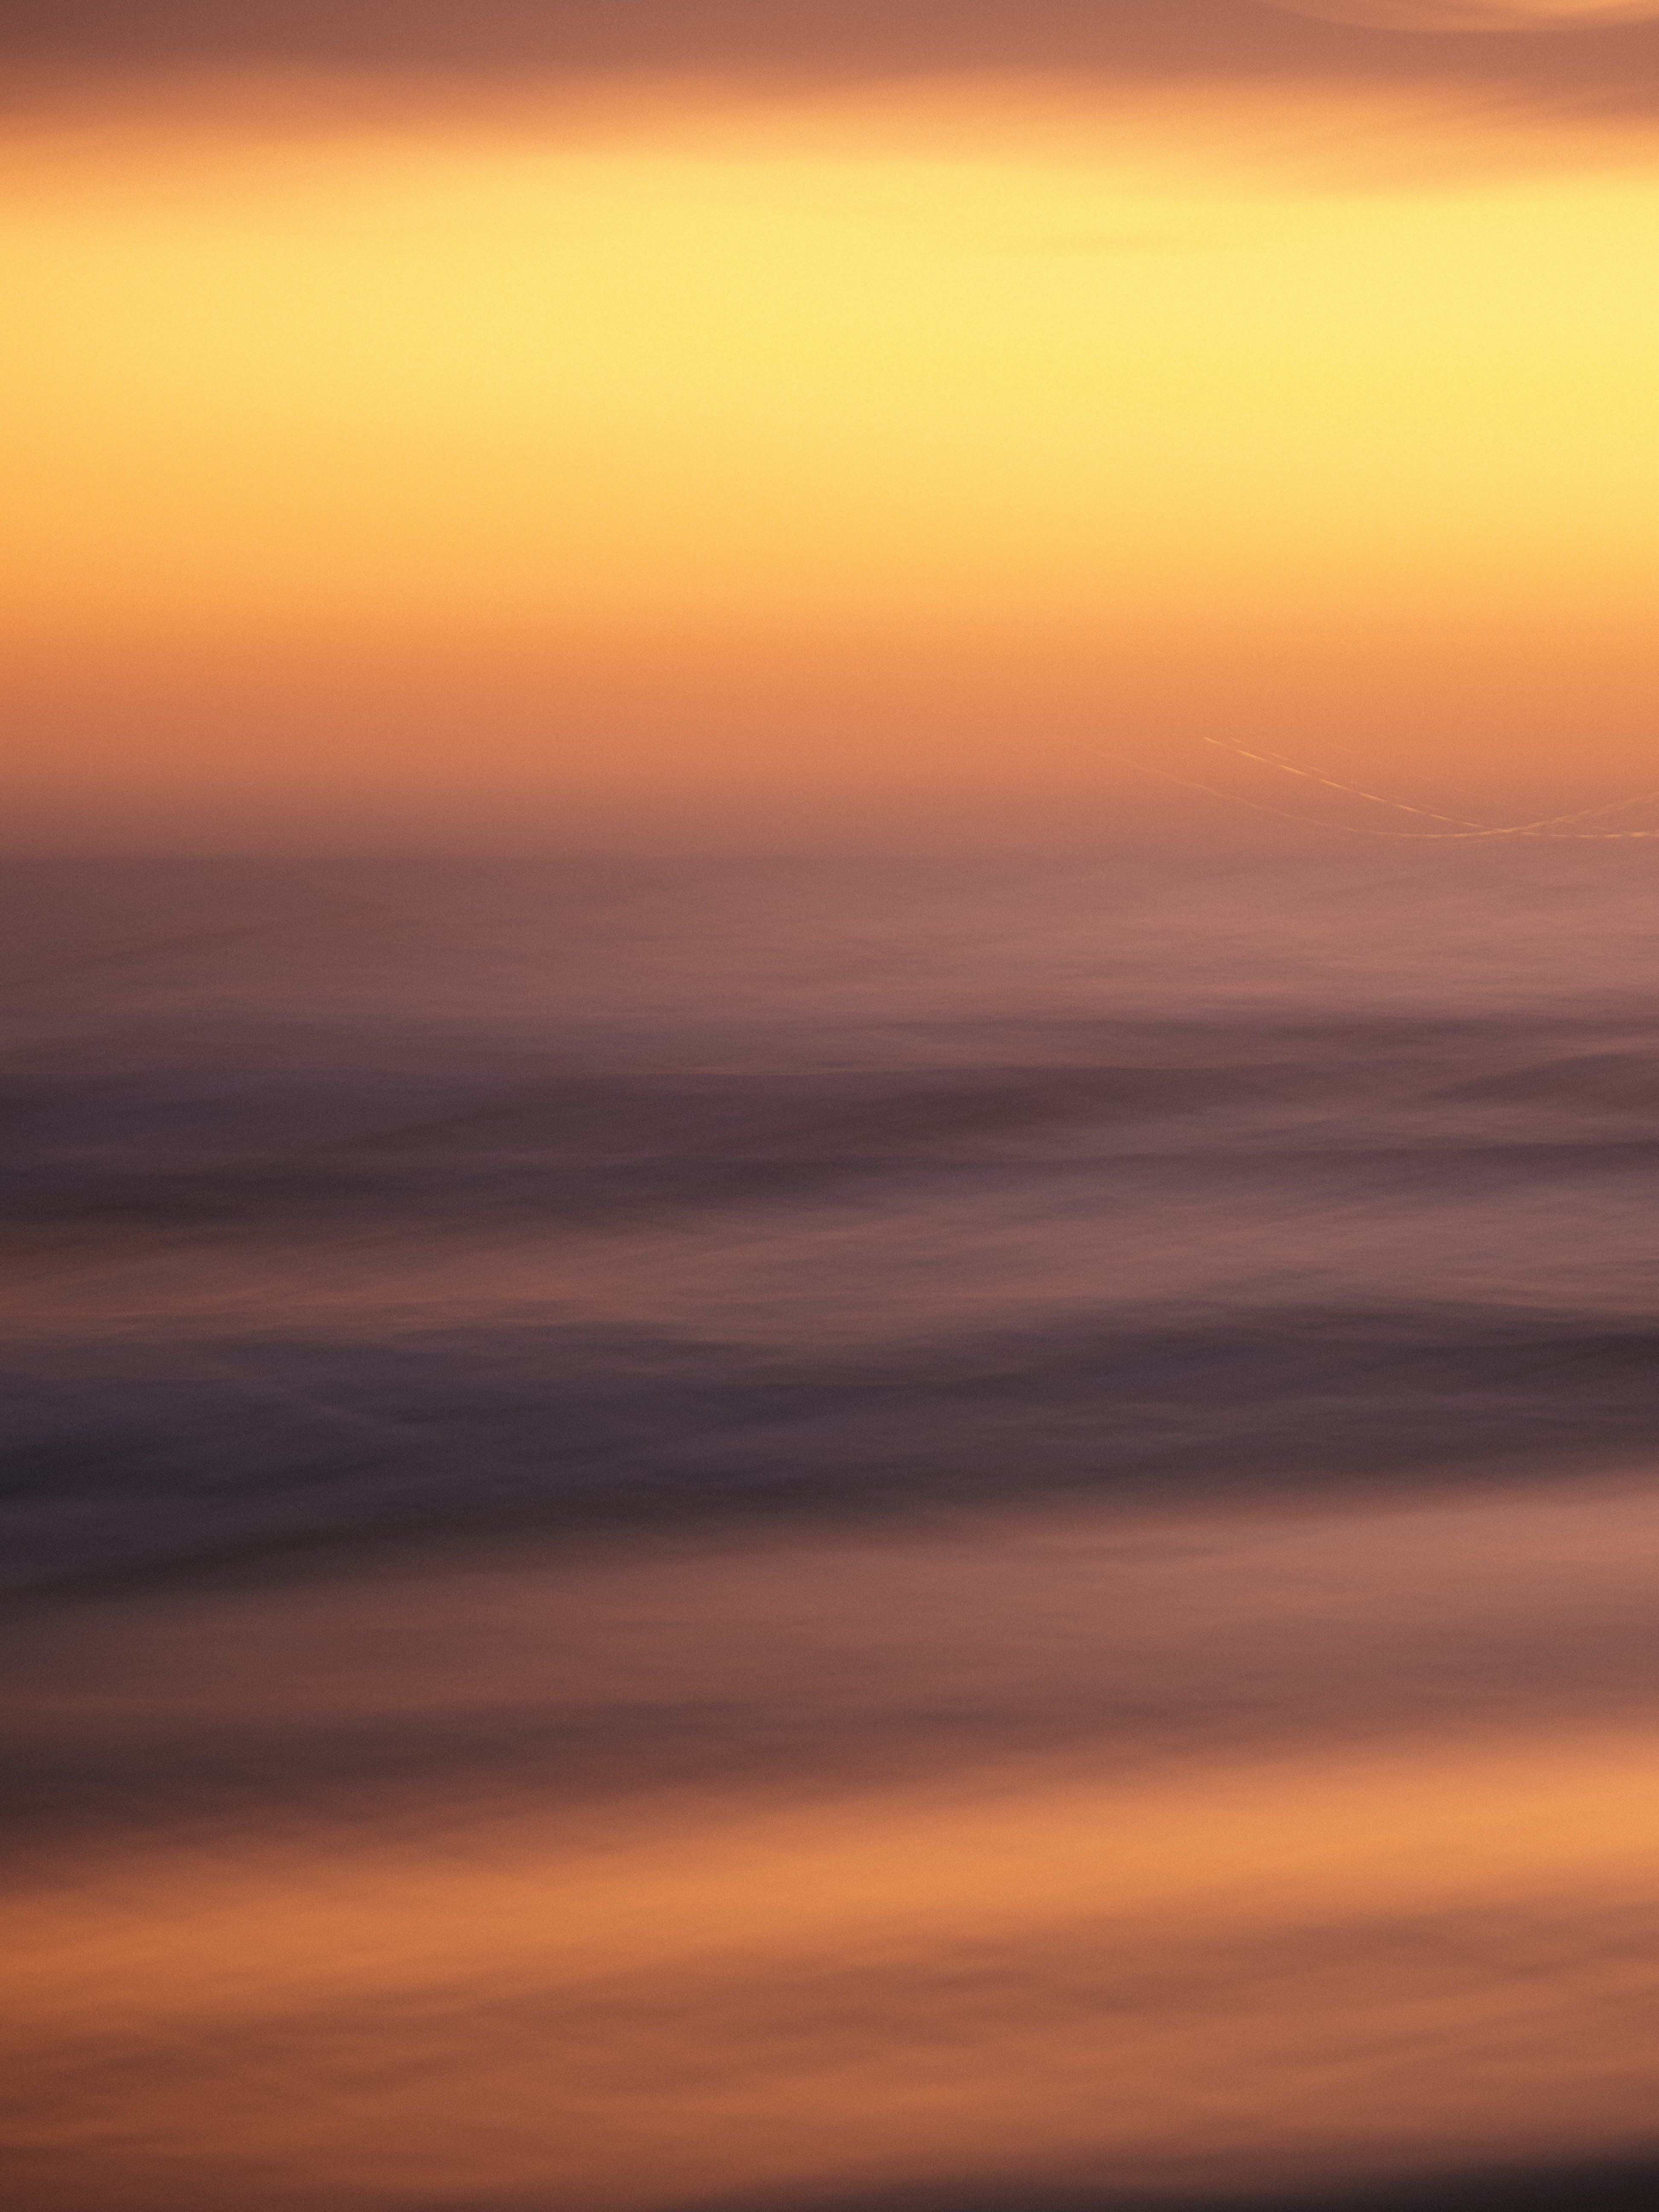 long exposure, abstract, sky, twilight, clouds, blur, smooth, dusk